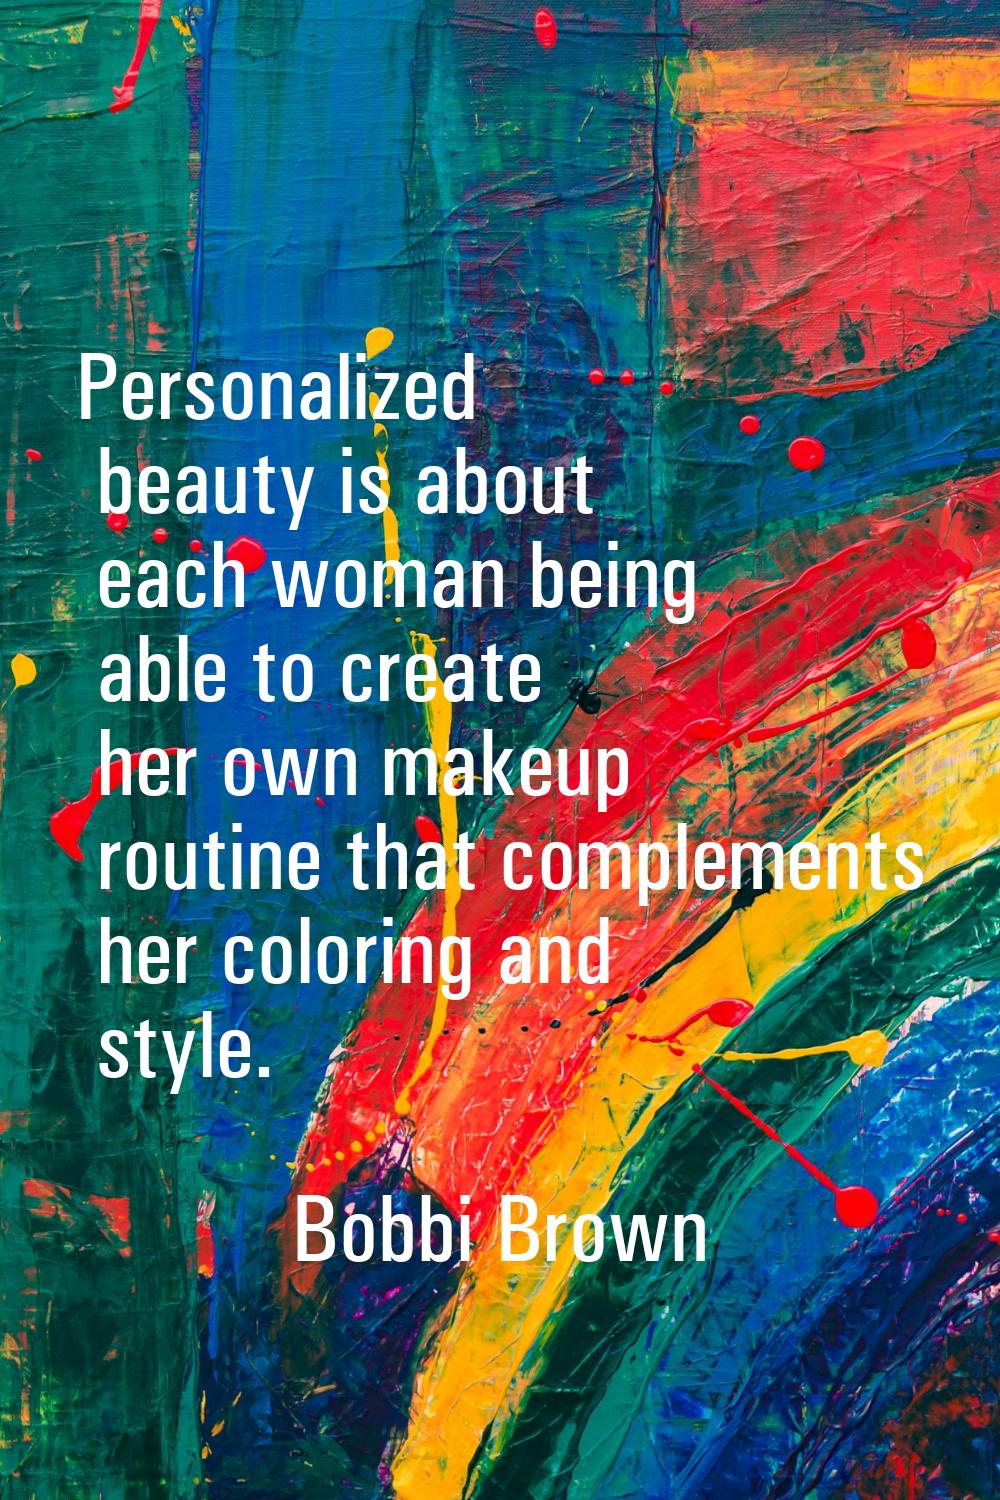 Personalized beauty is about each woman being able to create her own makeup routine that complement